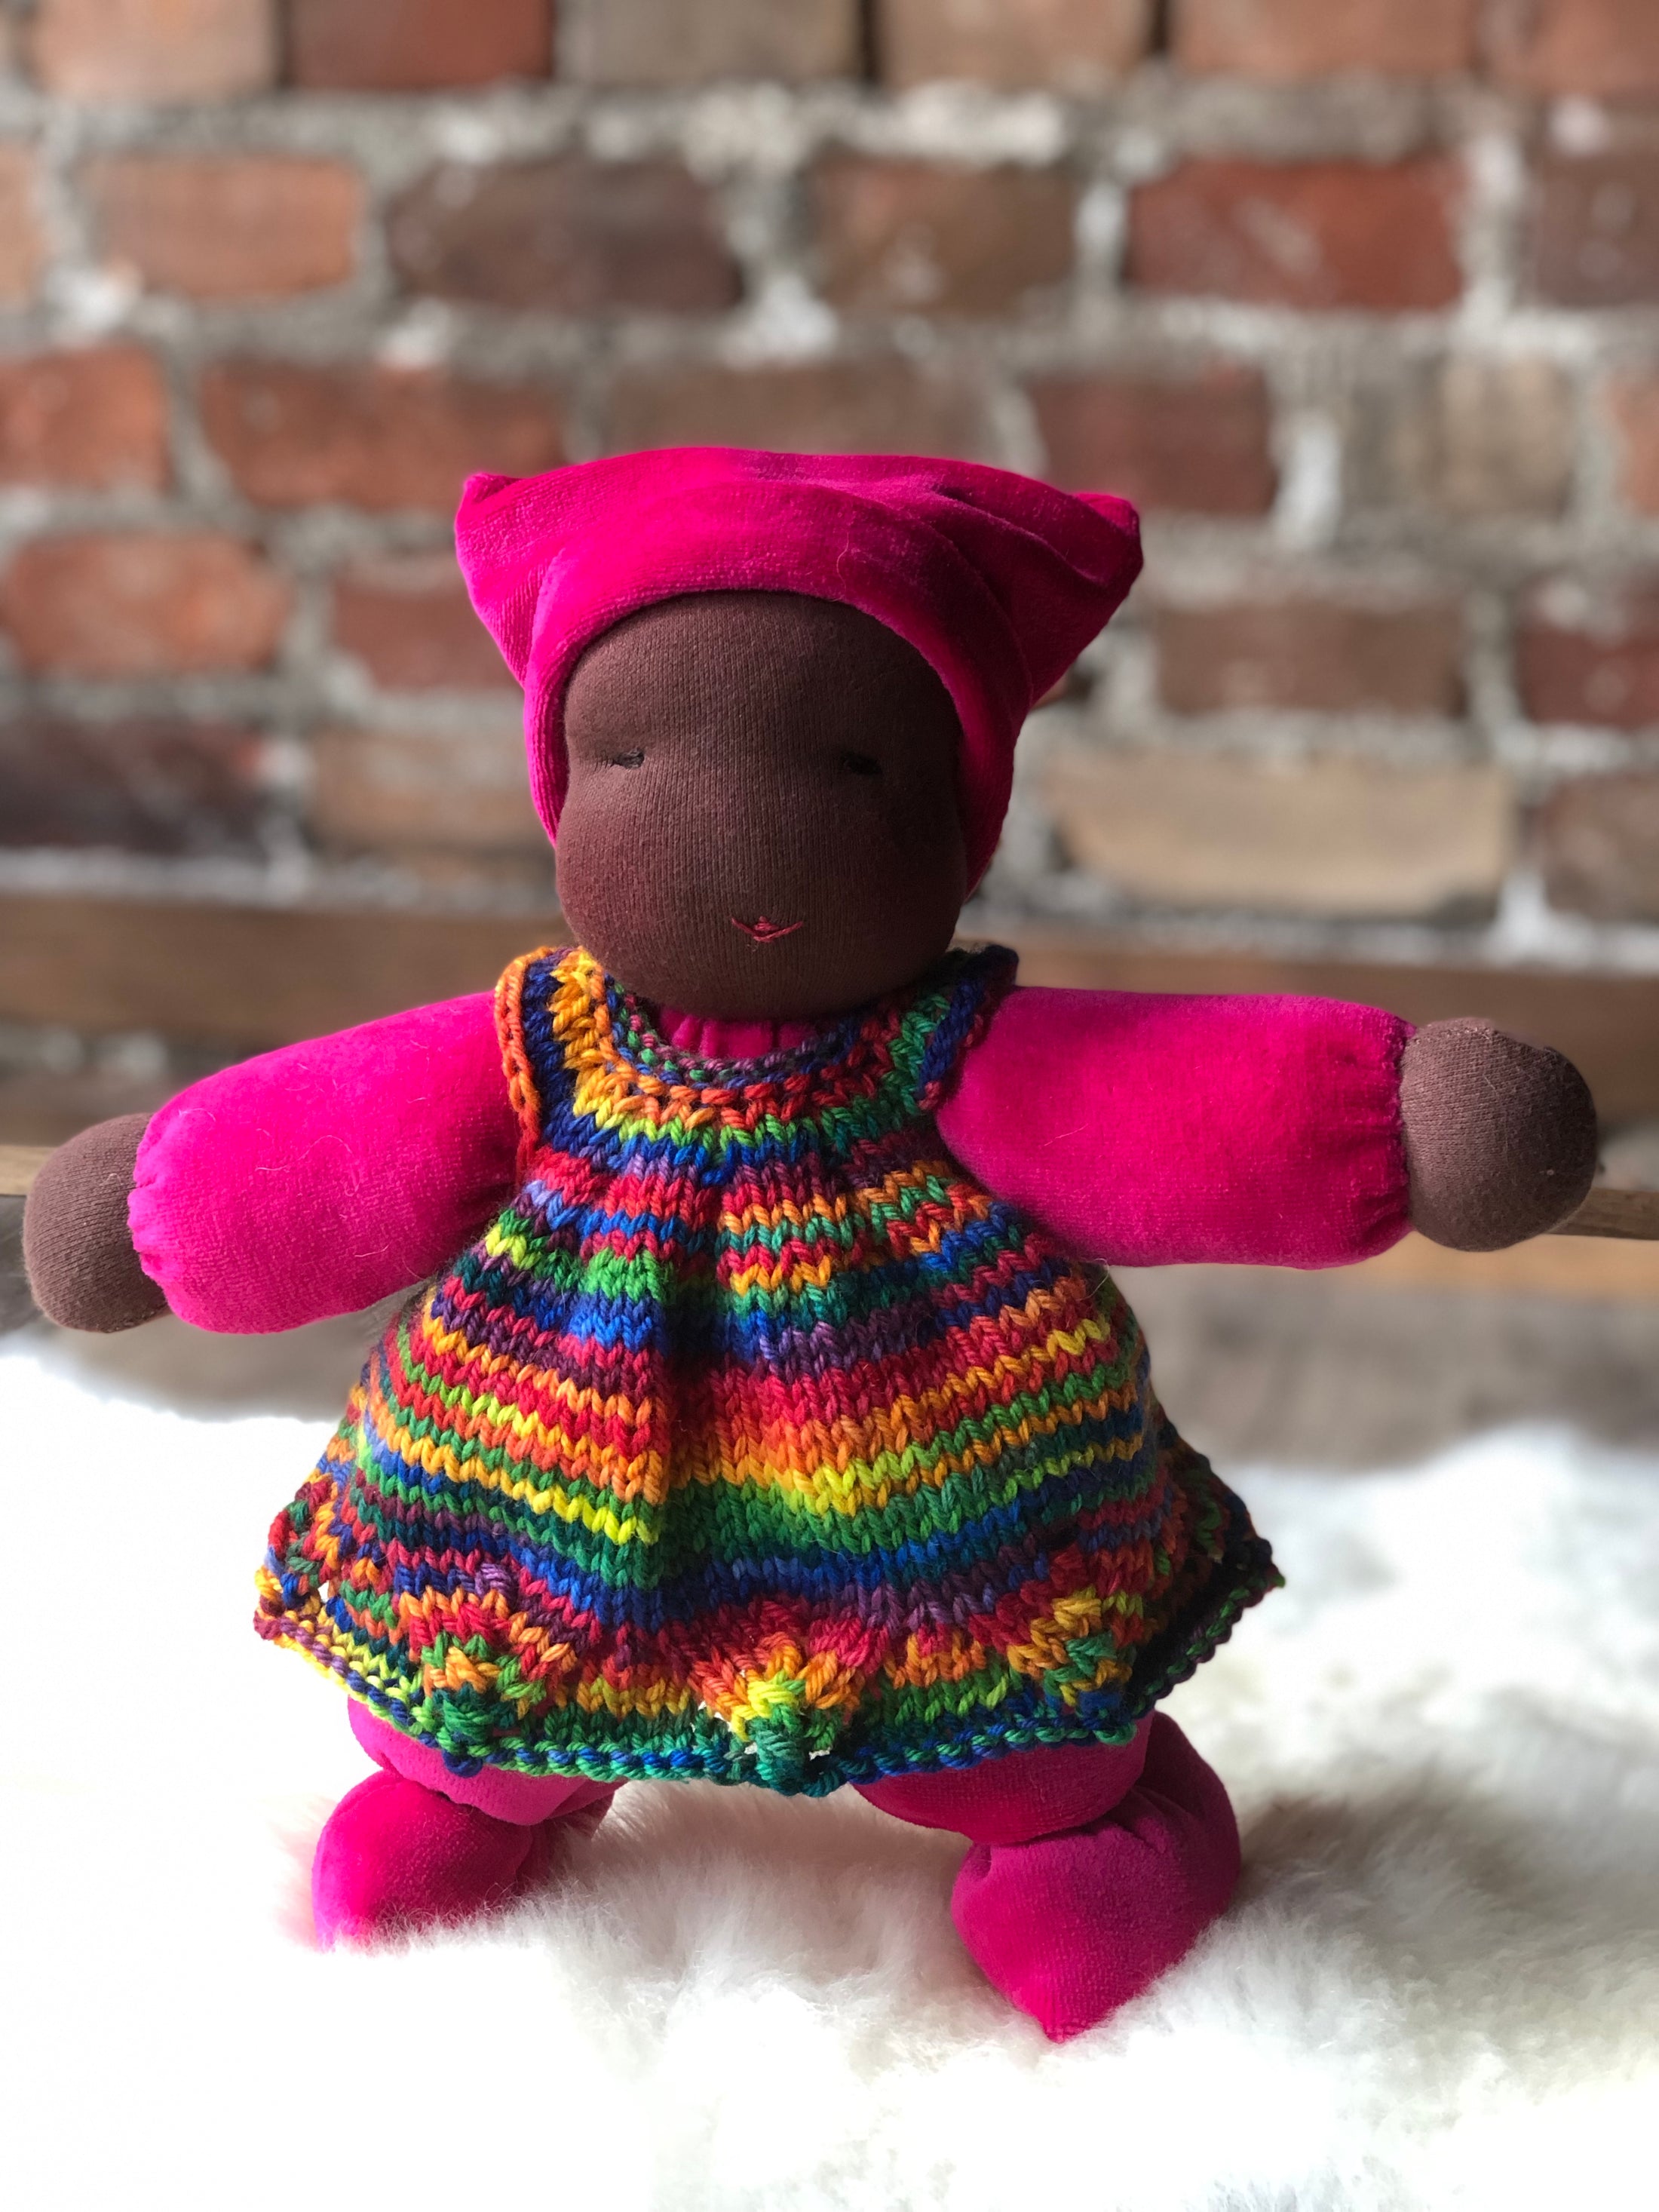 first baby doll, cuddle doll, cotton velour doll, waldorf doll, snuggle doll, toddler doll, nursery gift, baby shower gift